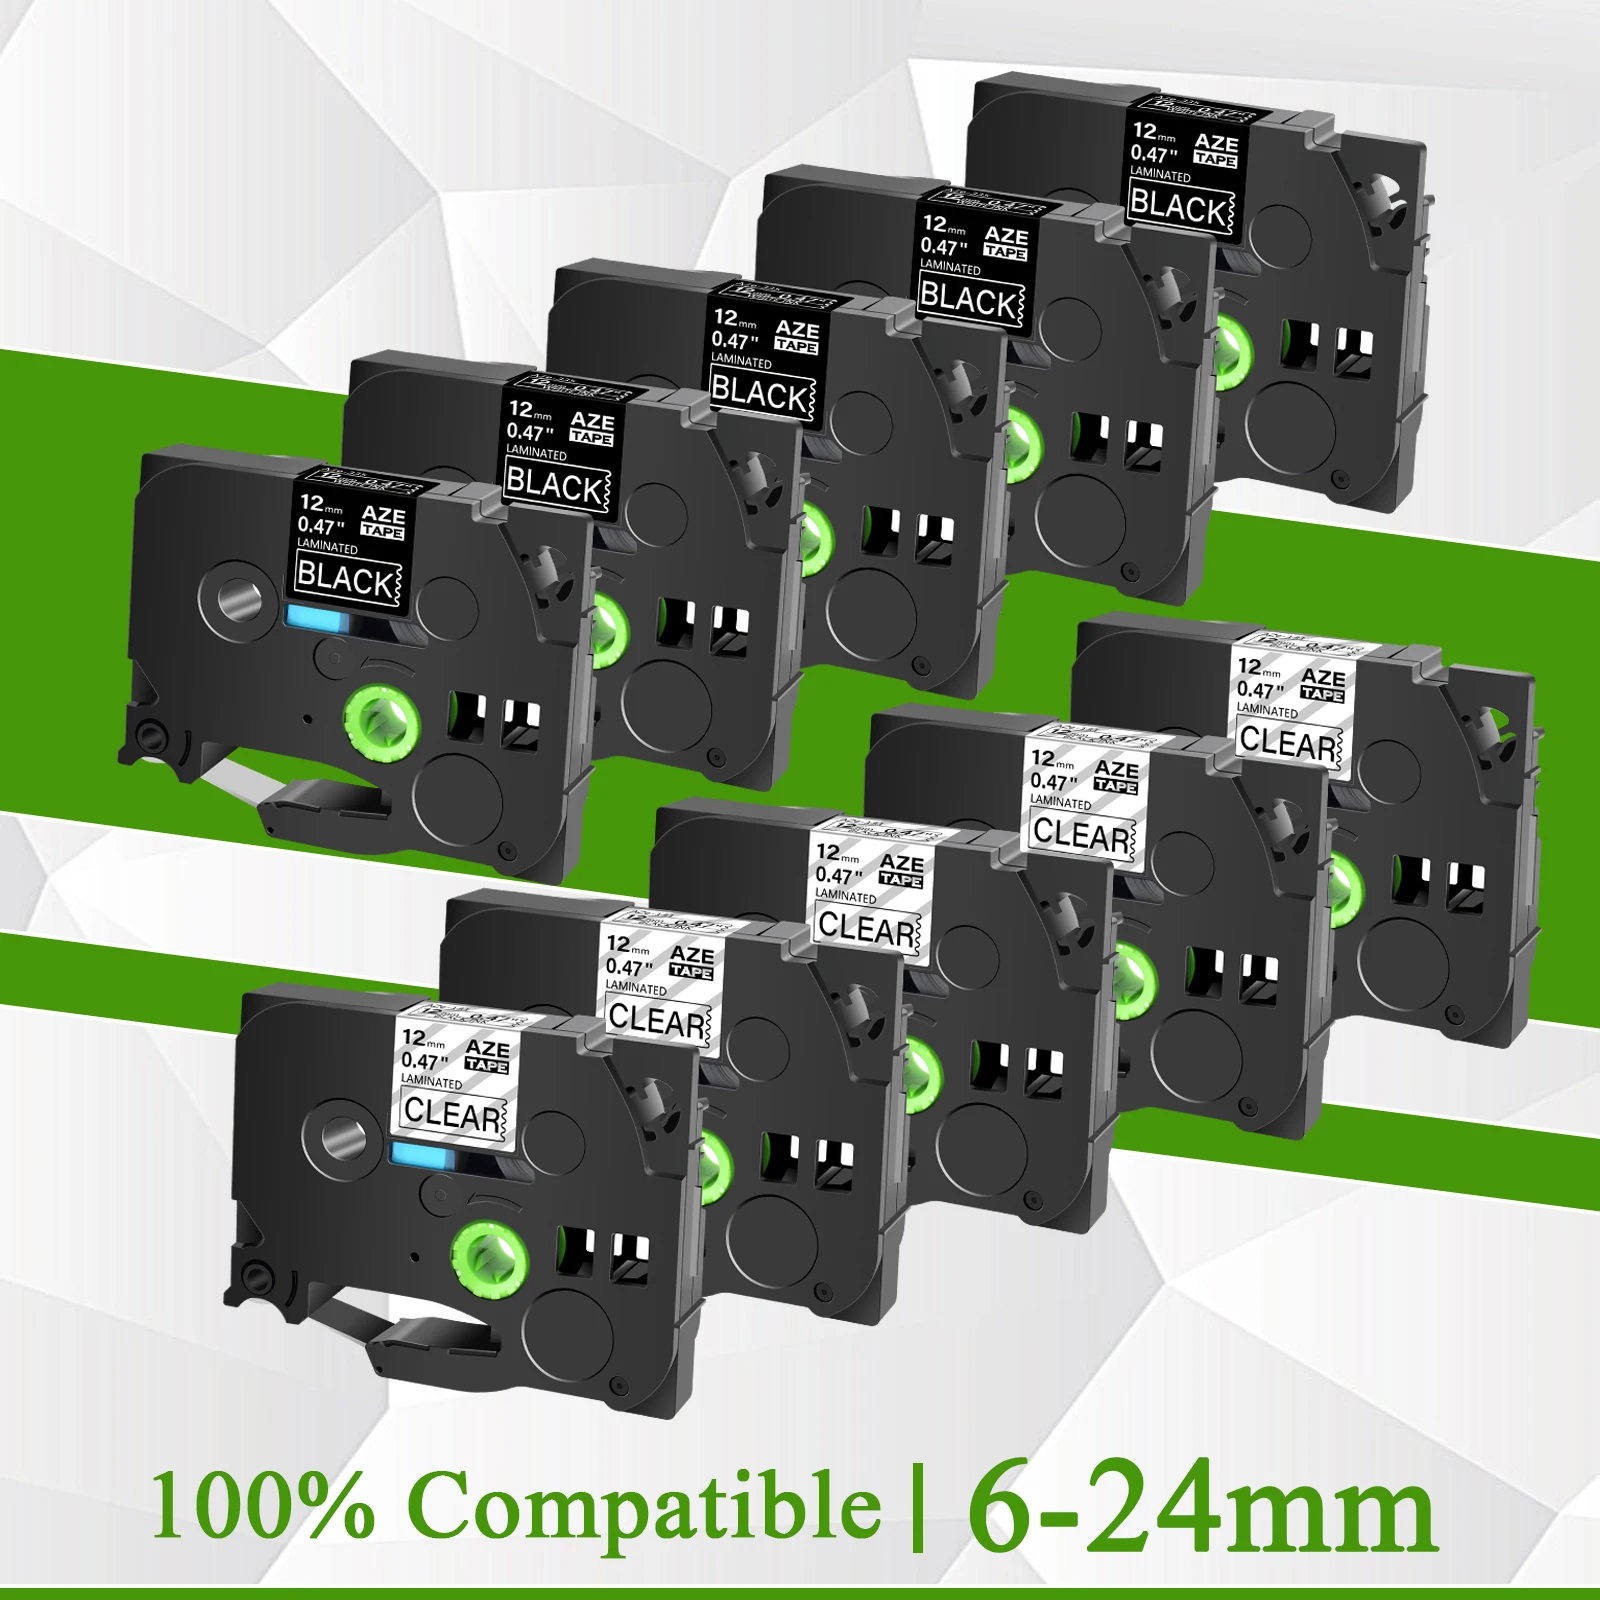 

10Pcs White on Black+Black on Clear 6-24mm Label Tapes Compaible for Brother TZE-131 TZ 141 335 345 355 151 for P-Touch Printers